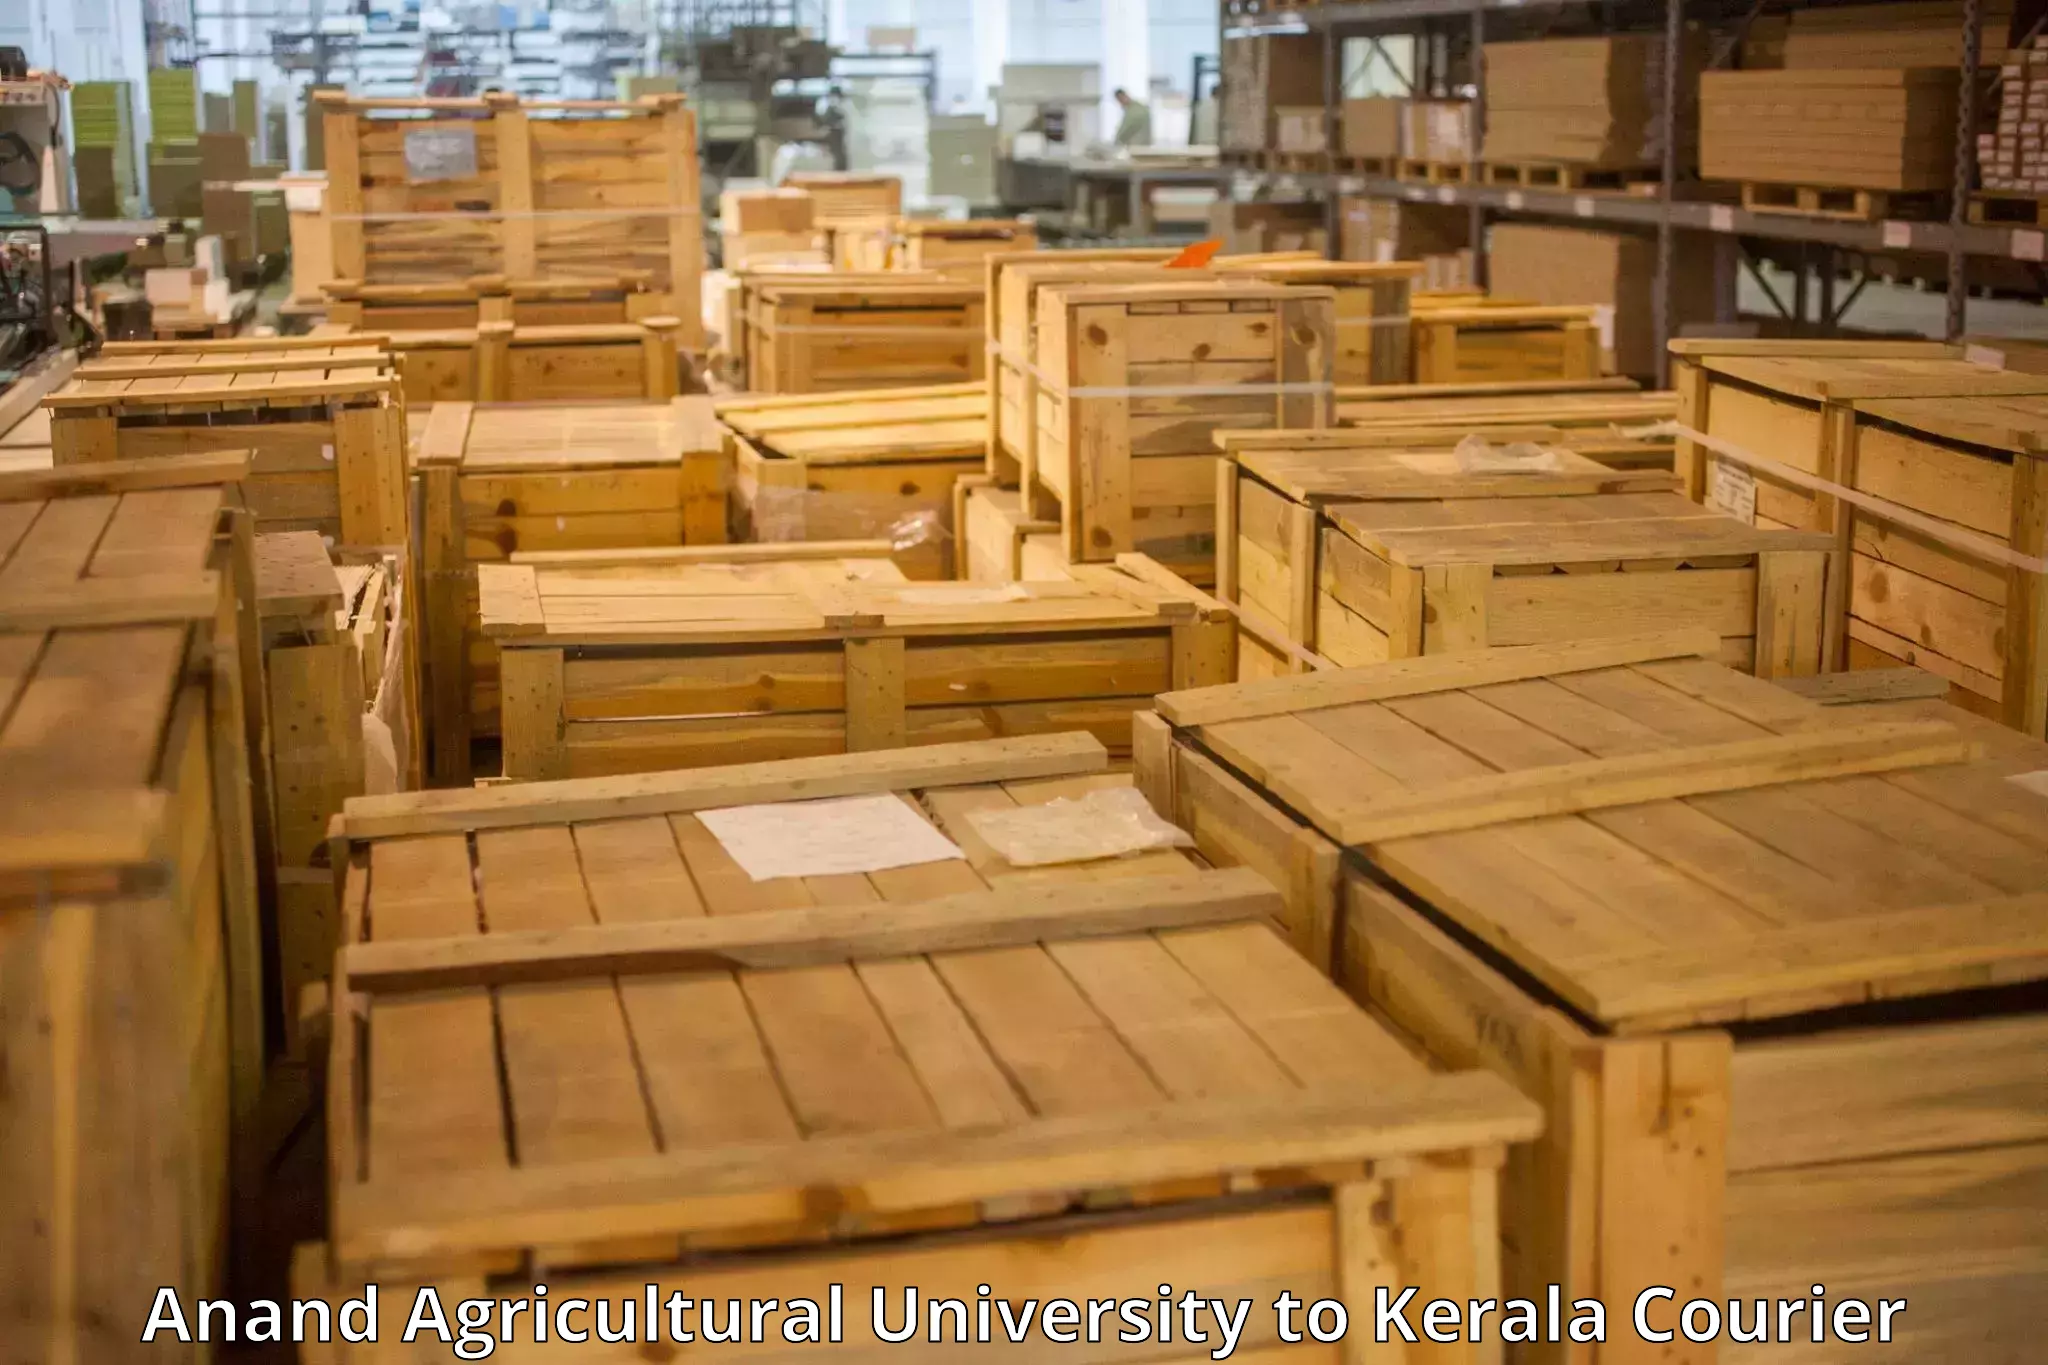 High-quality baggage shipment Anand Agricultural University to Adimali